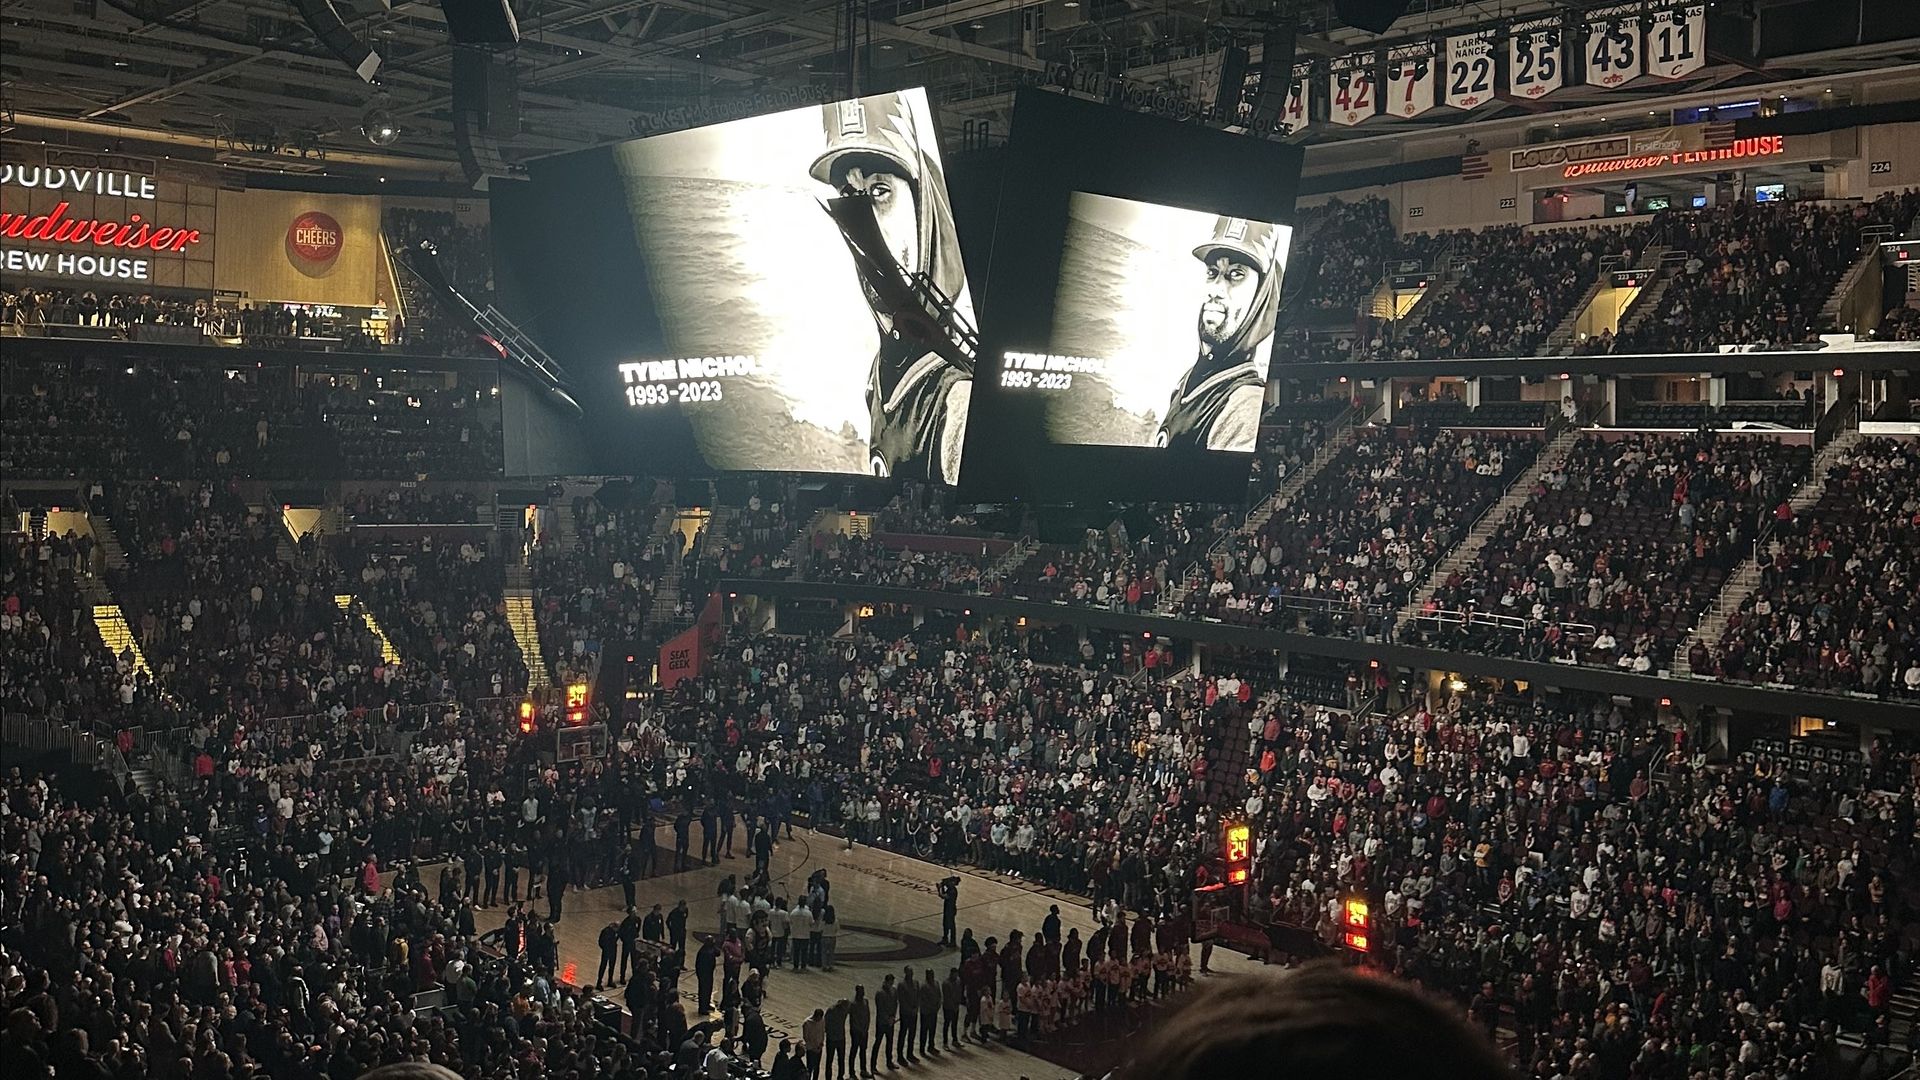 Thousands of fans stand inside a basketball arena as a tribute to Tyre Nichols shows on a jumbotron.